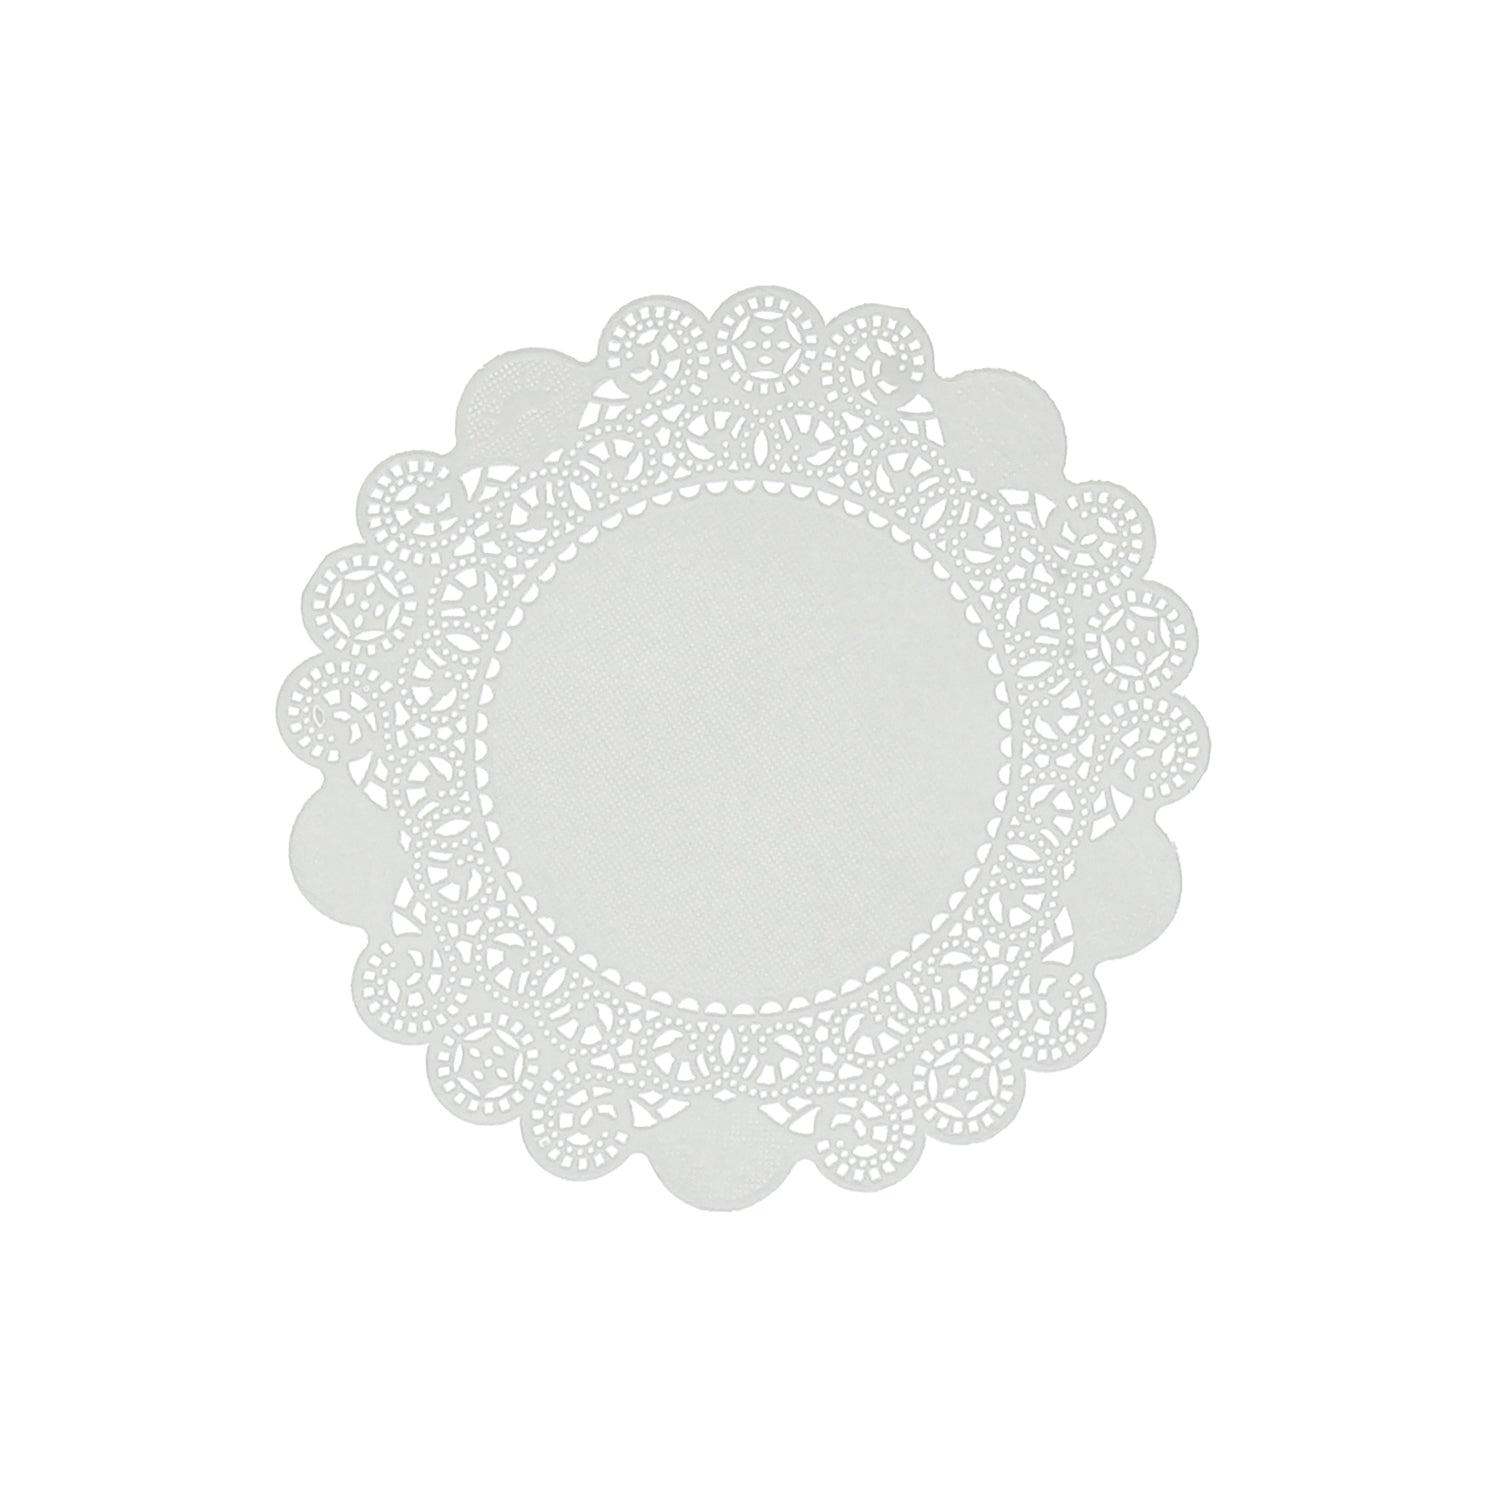 Uses Of Paper Doilies And How To Choose The Best One